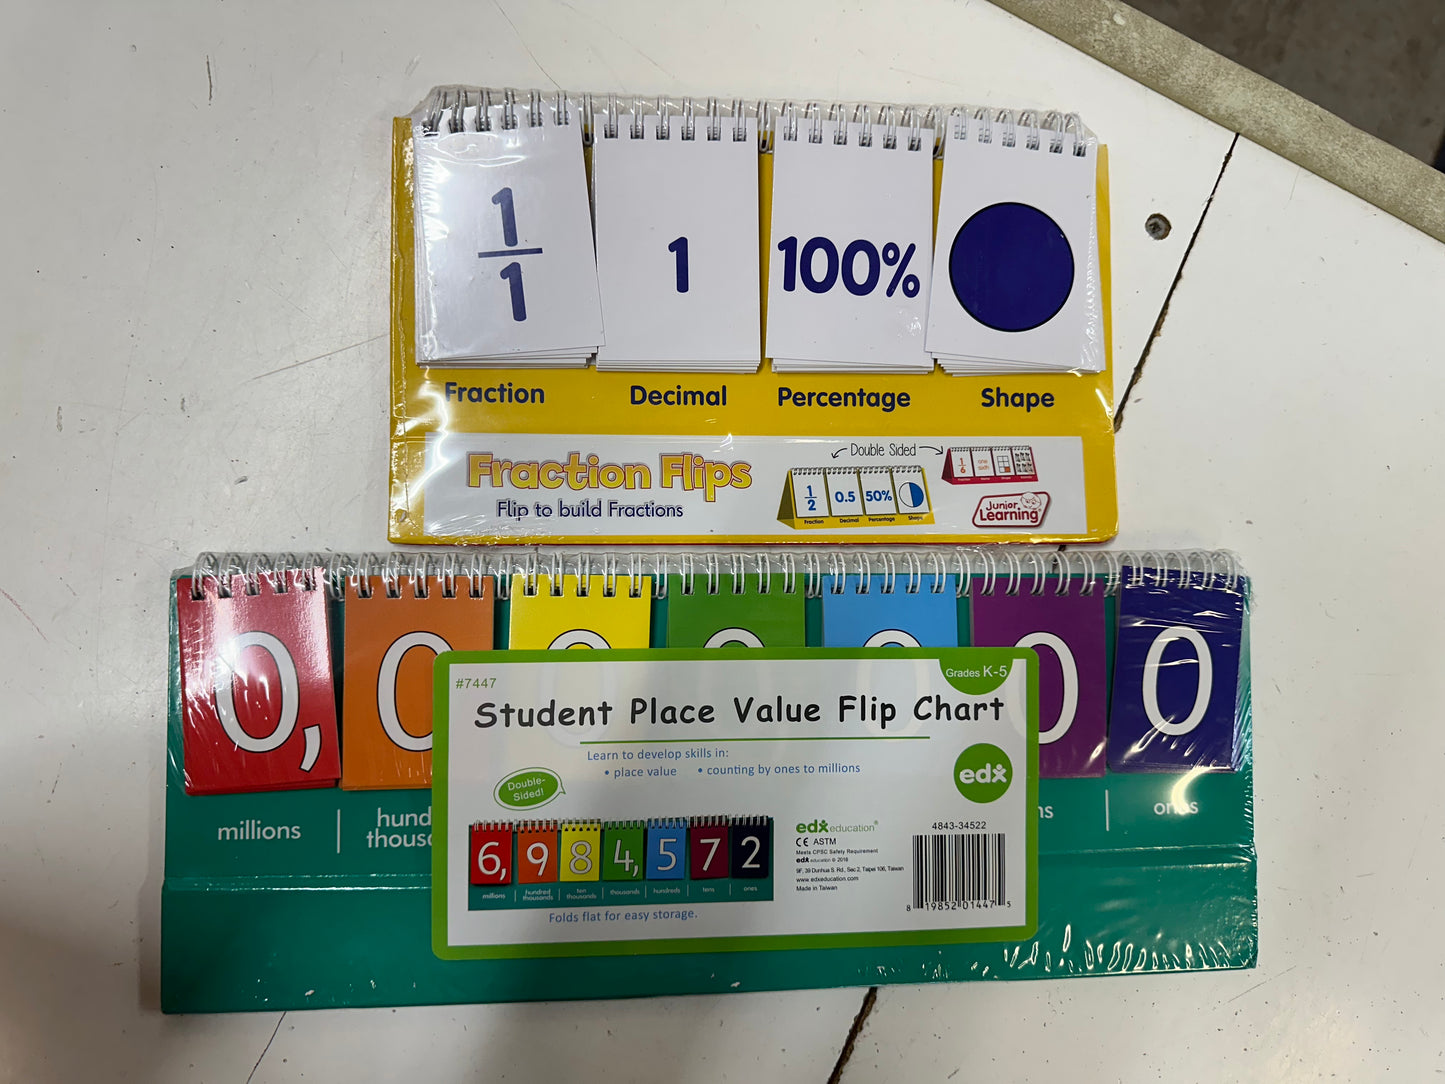 New Learning Flip Charts